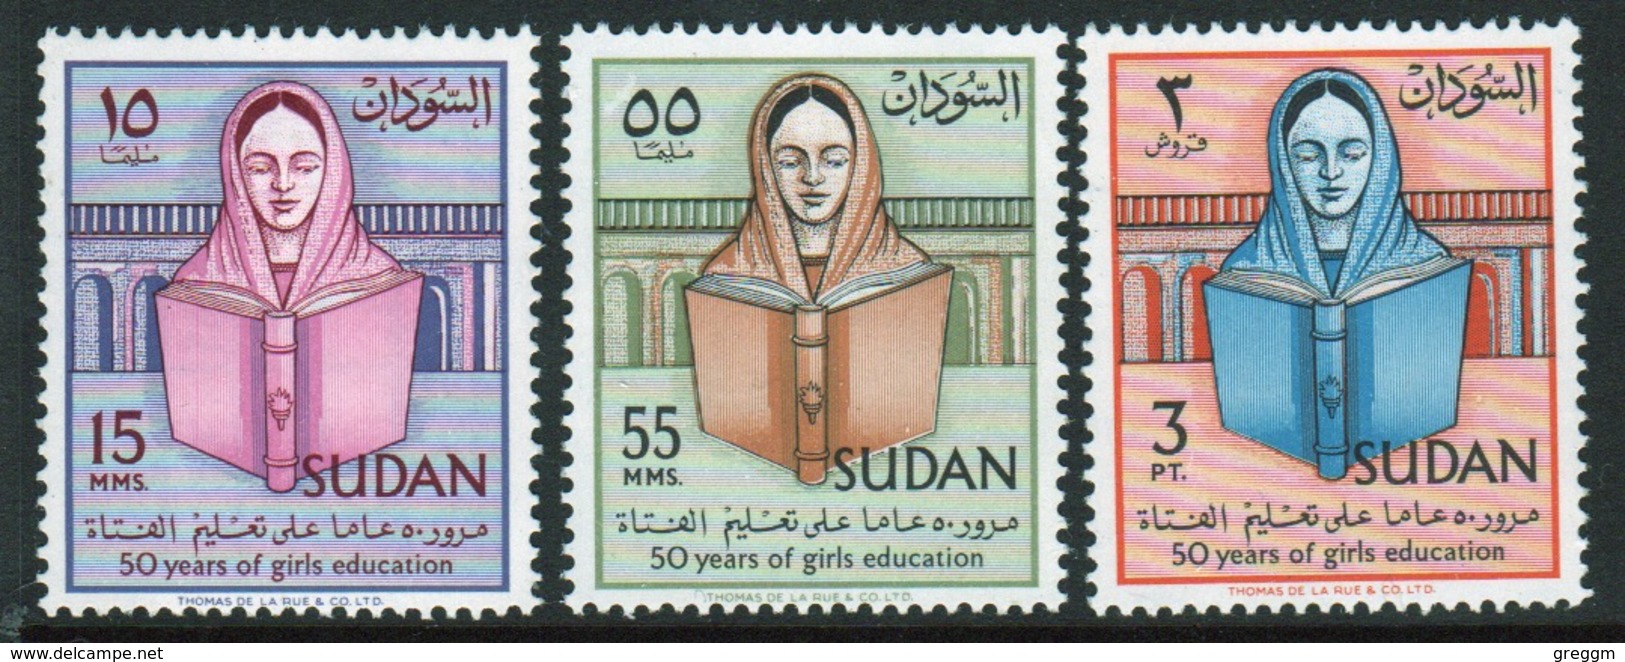 Sudan Set Of Stamps From 1961 To Celebrate 50 Years Of Girls Education. - Sudan (1954-...)